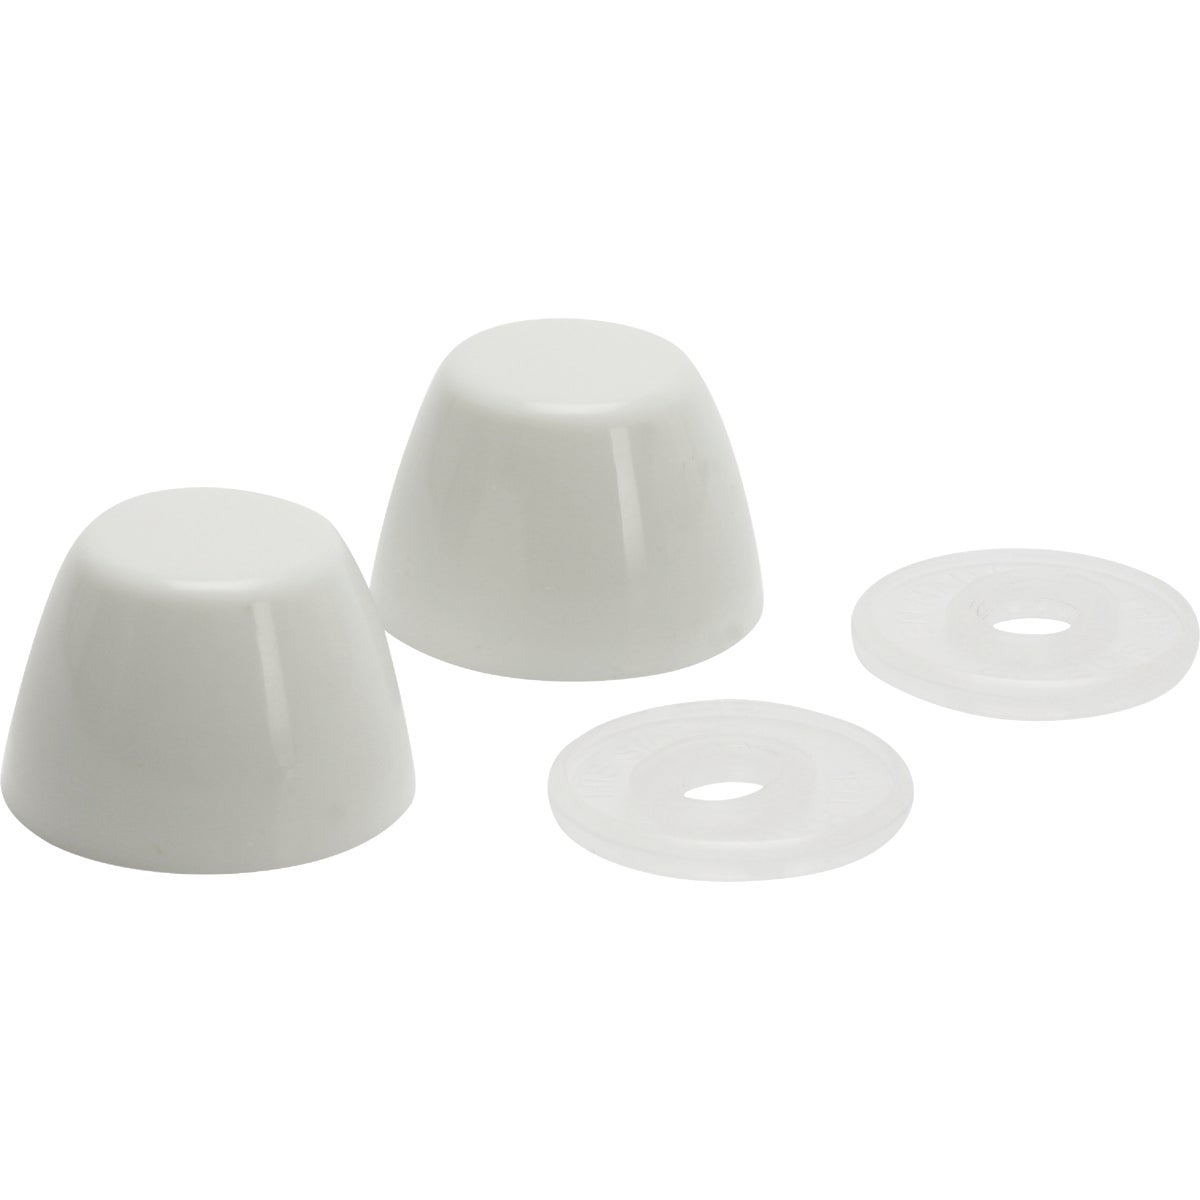 Item 473103, The Fluidmaster 7115 Toilet Bowl Bolt Caps offer a fast and simple way to 